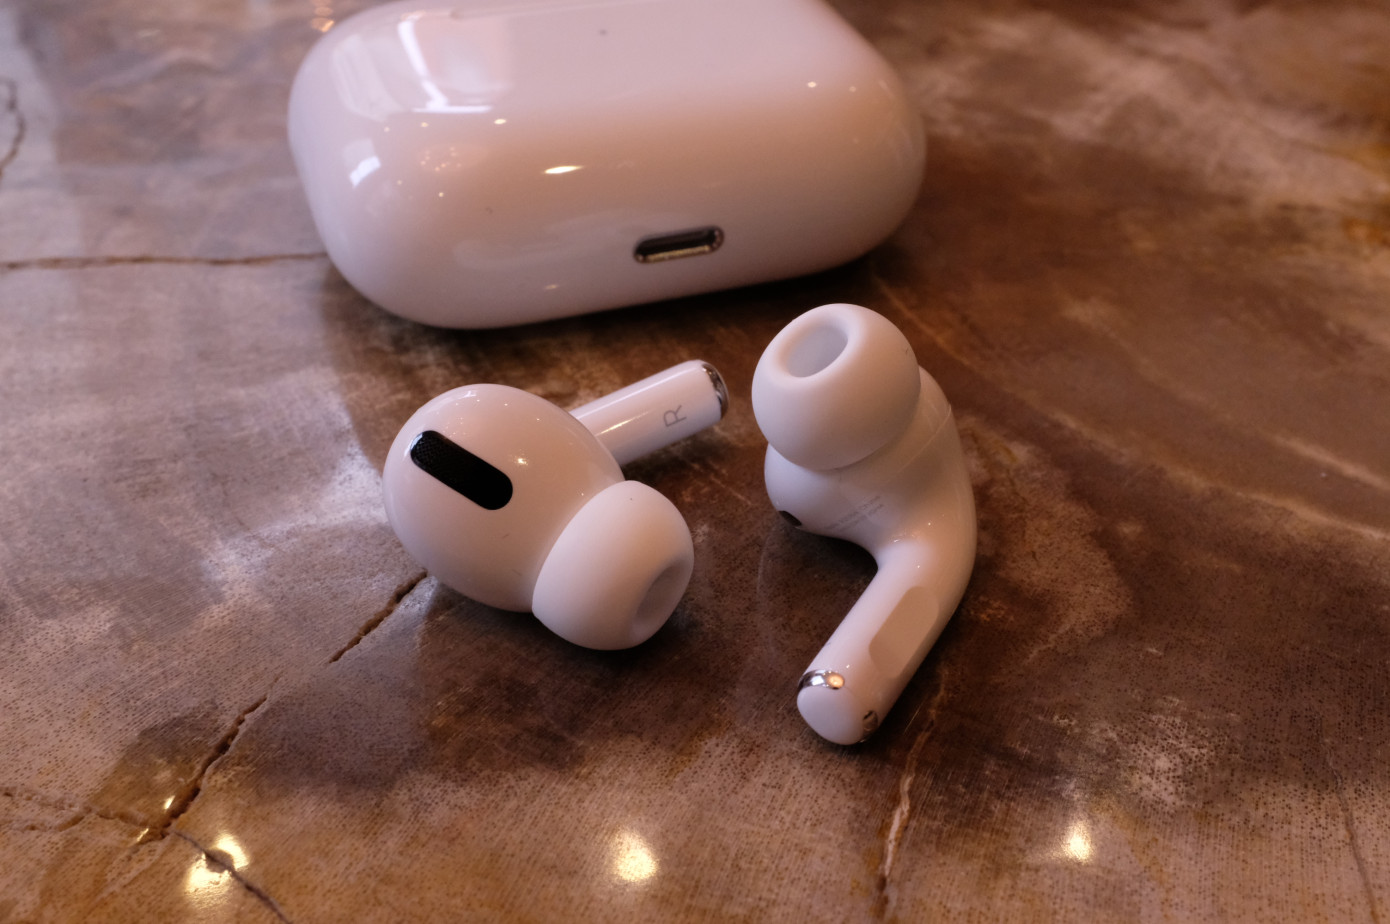 AirPods Pro launches silently on Apple's site at $249: Should You Upgrade?